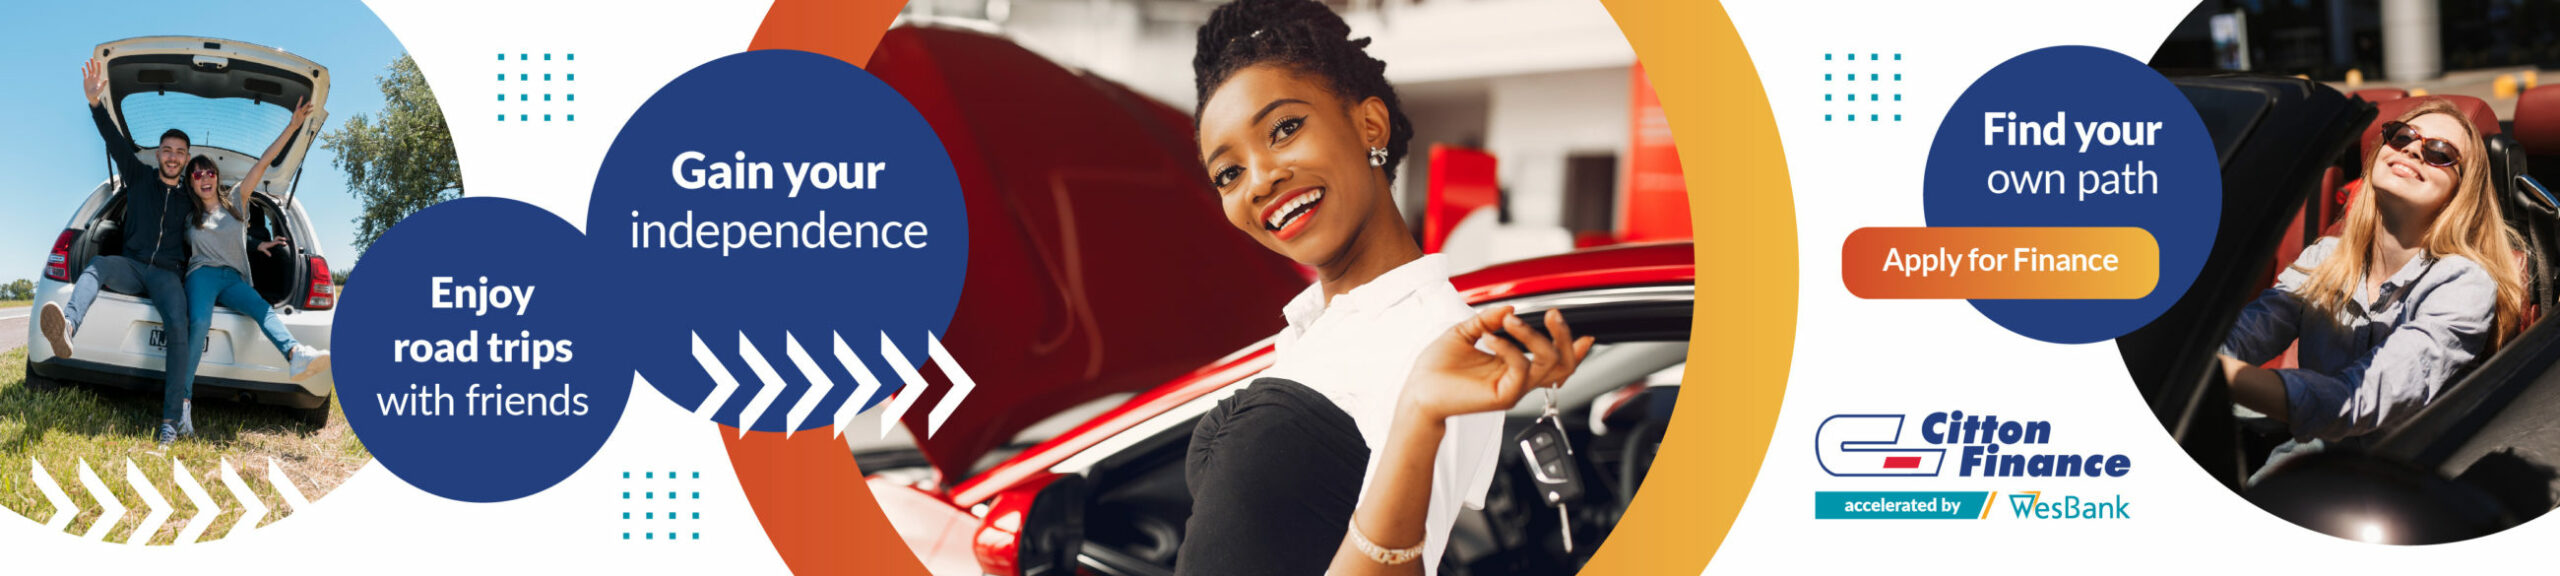 vehicle finance for graduates and first-time buyers
